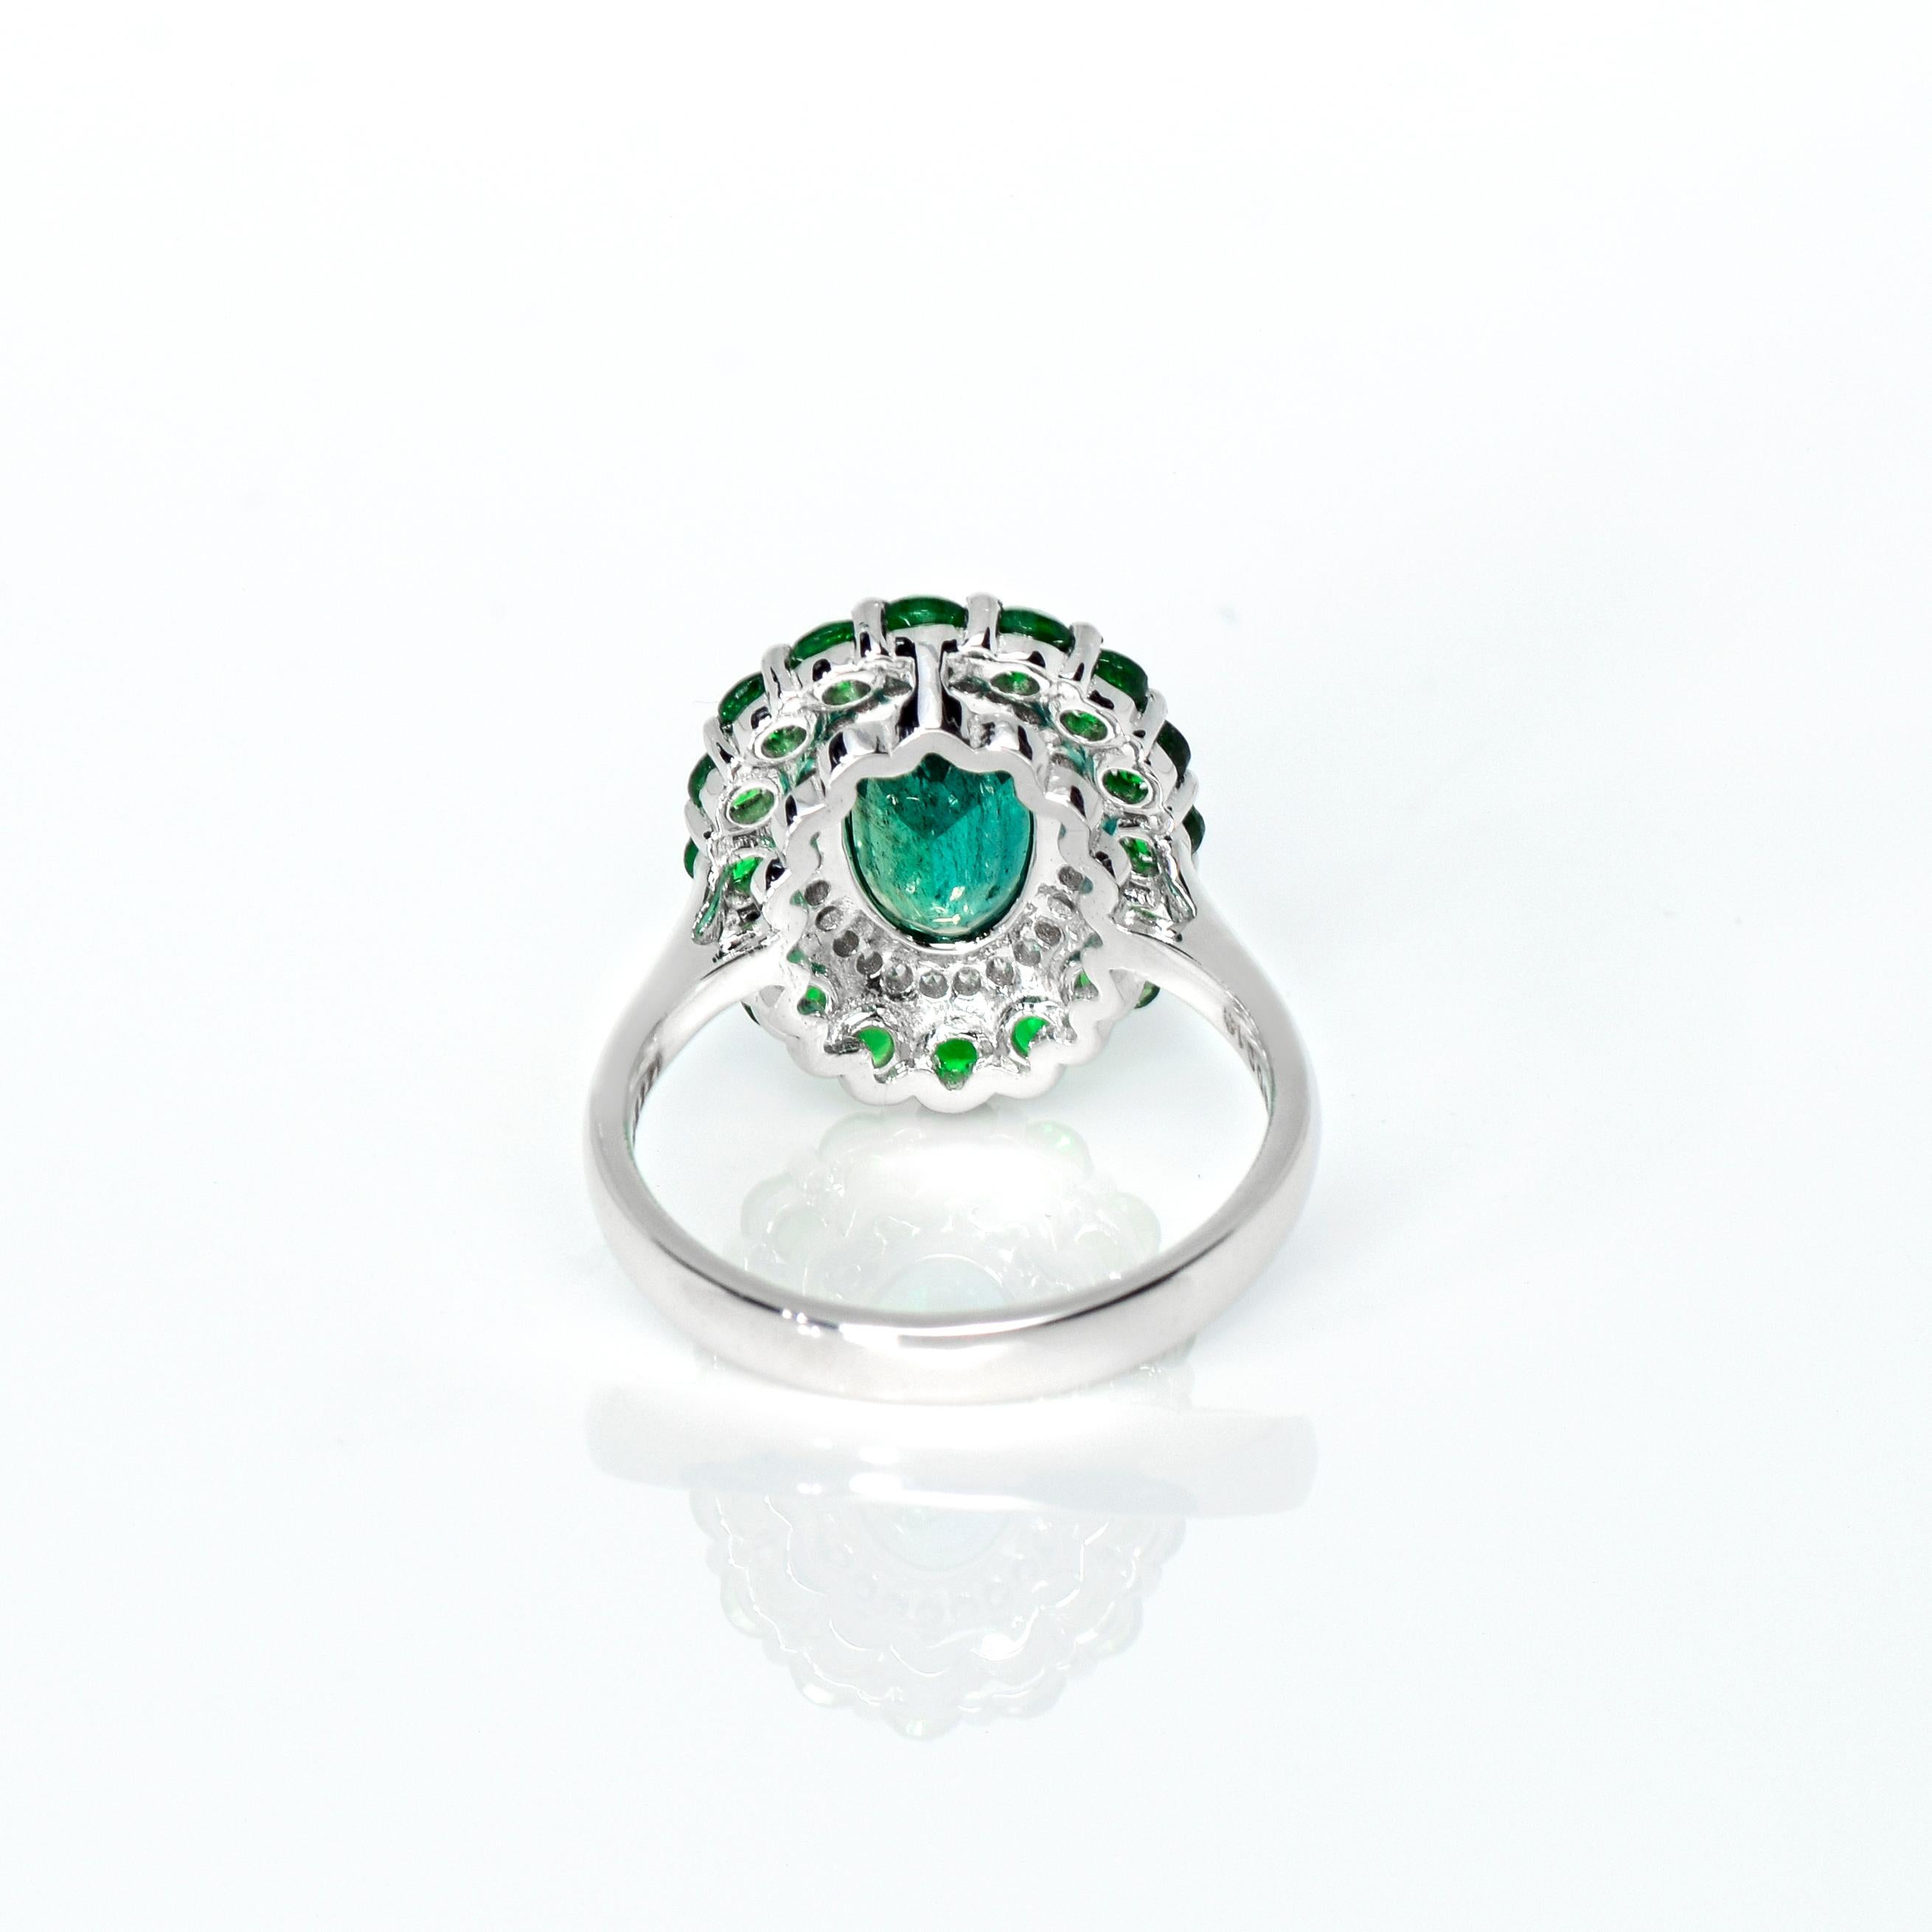 IGI 18k 2.21 Ct Emerald&Tsavorite Antique Art Deco Style Engagement Ring In New Condition For Sale In Kaohsiung City, TW